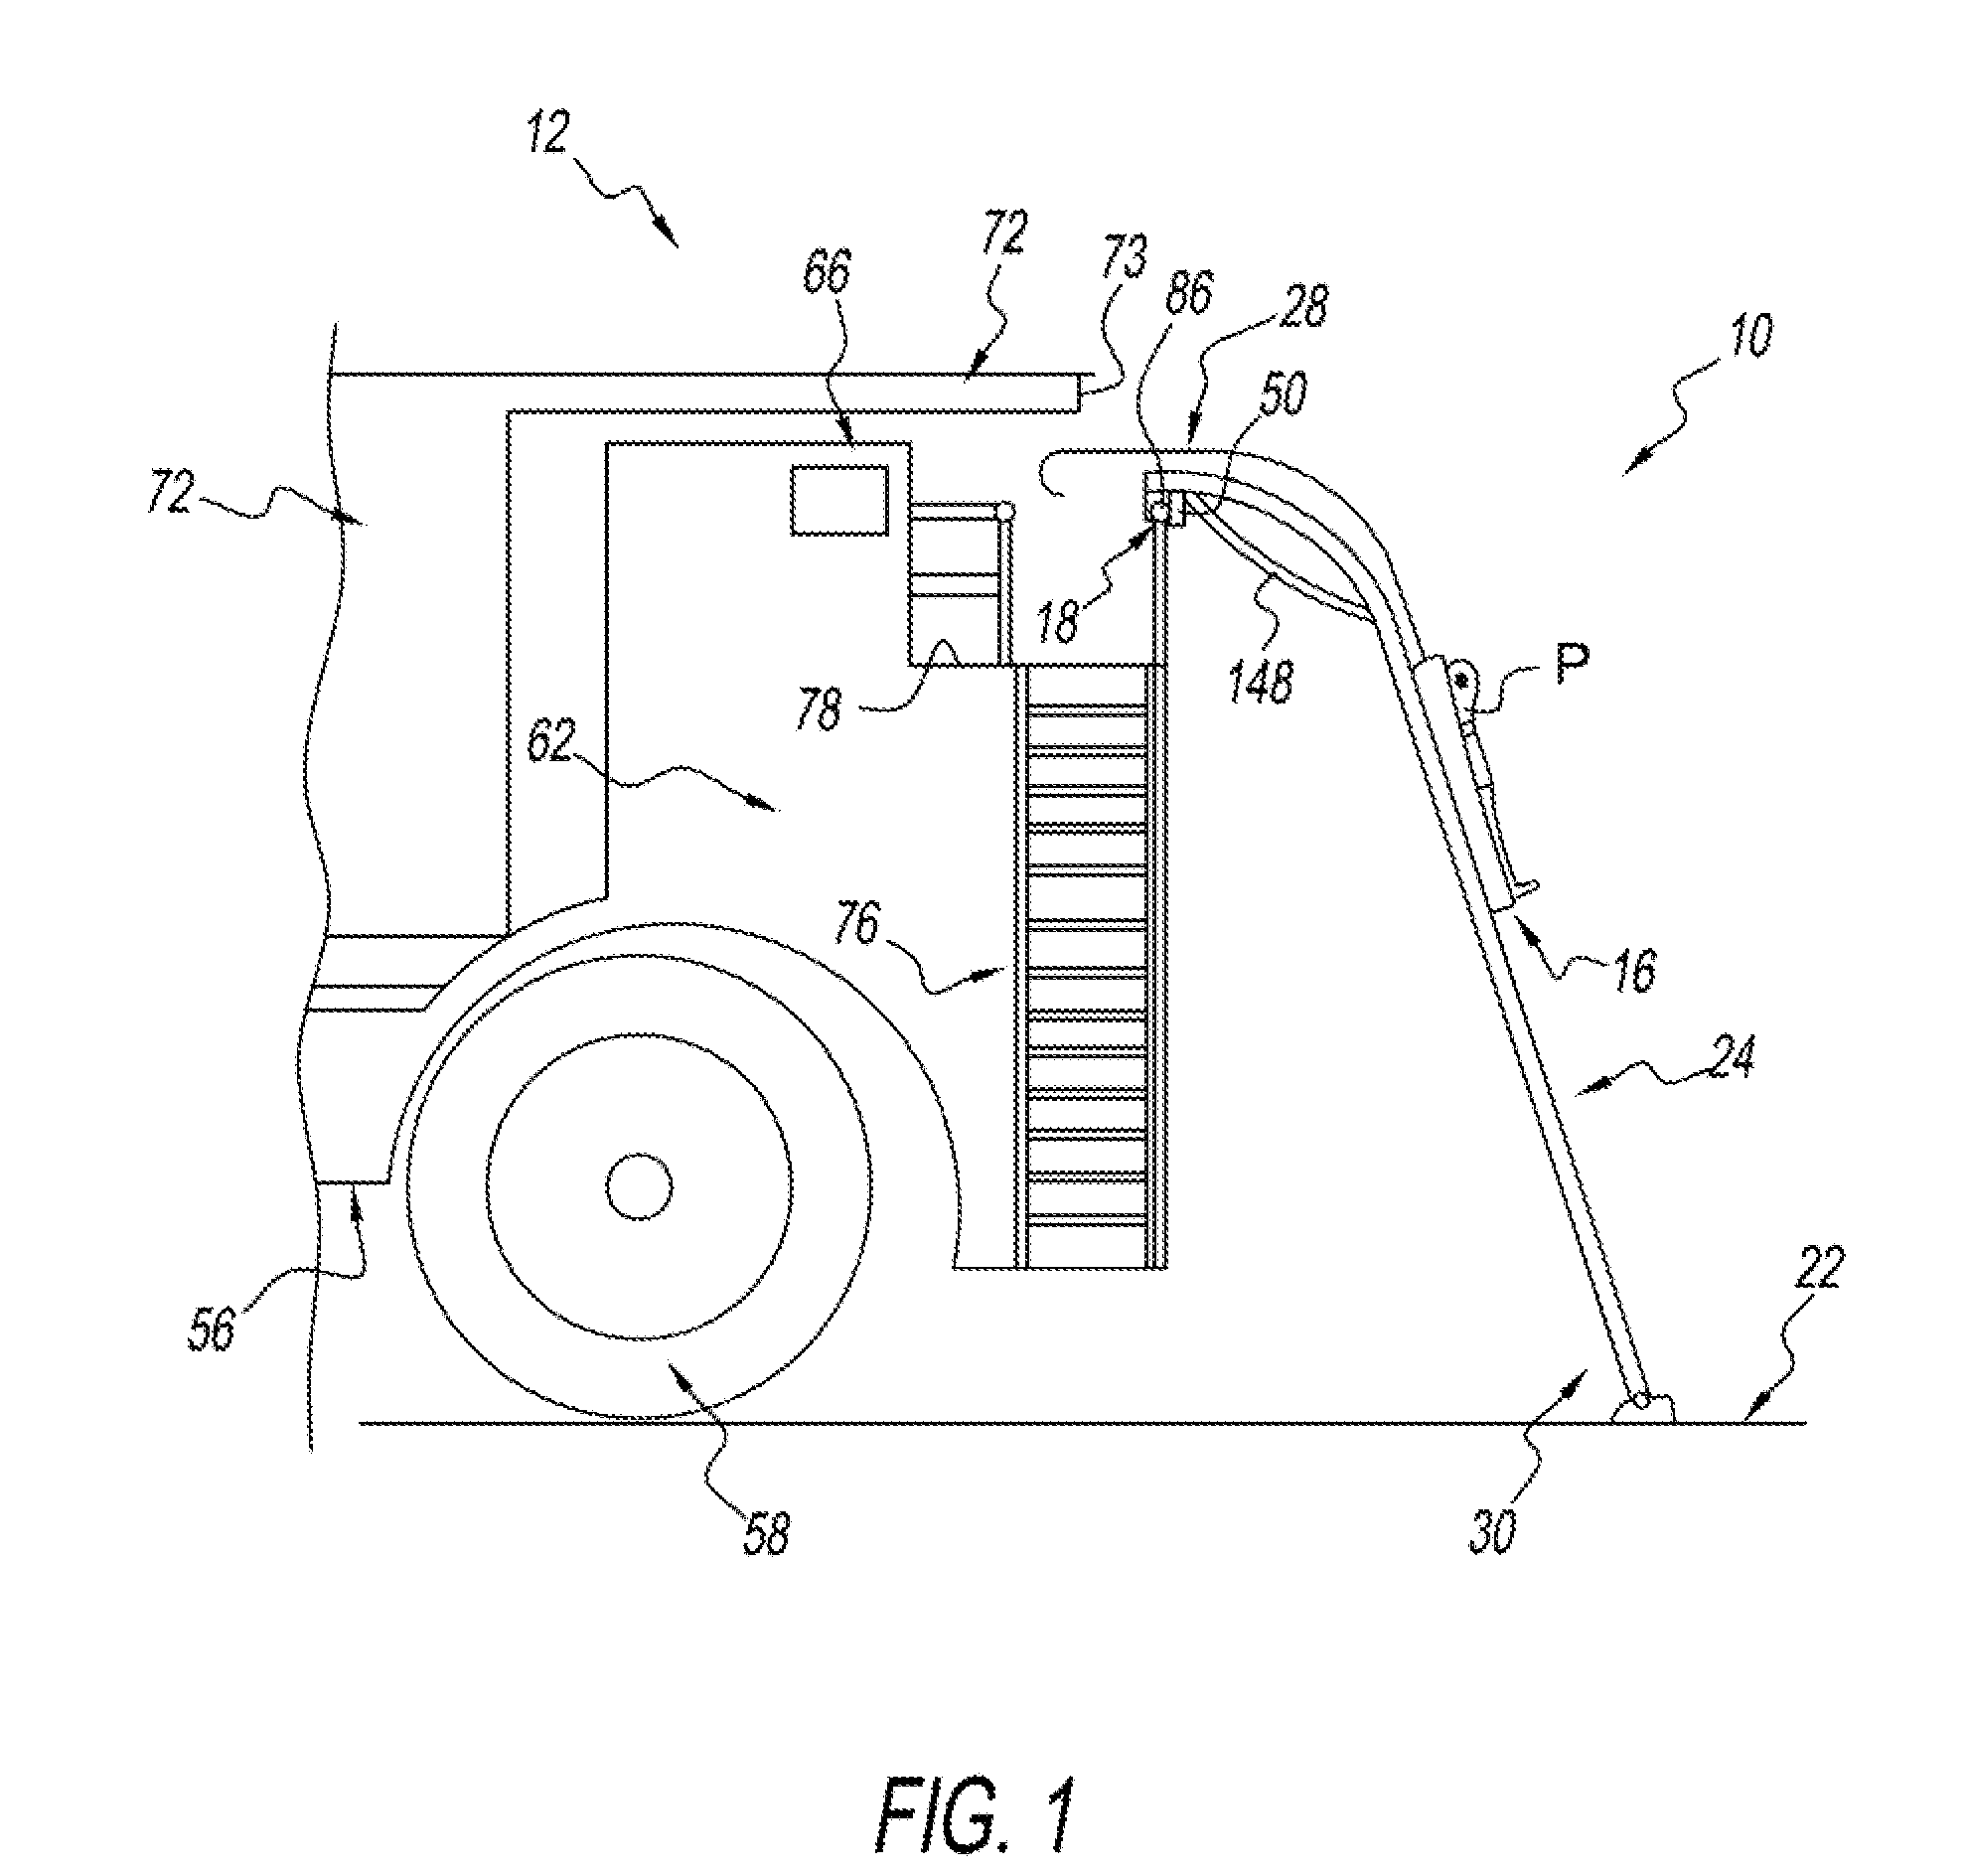 Portable extrication device and method of use